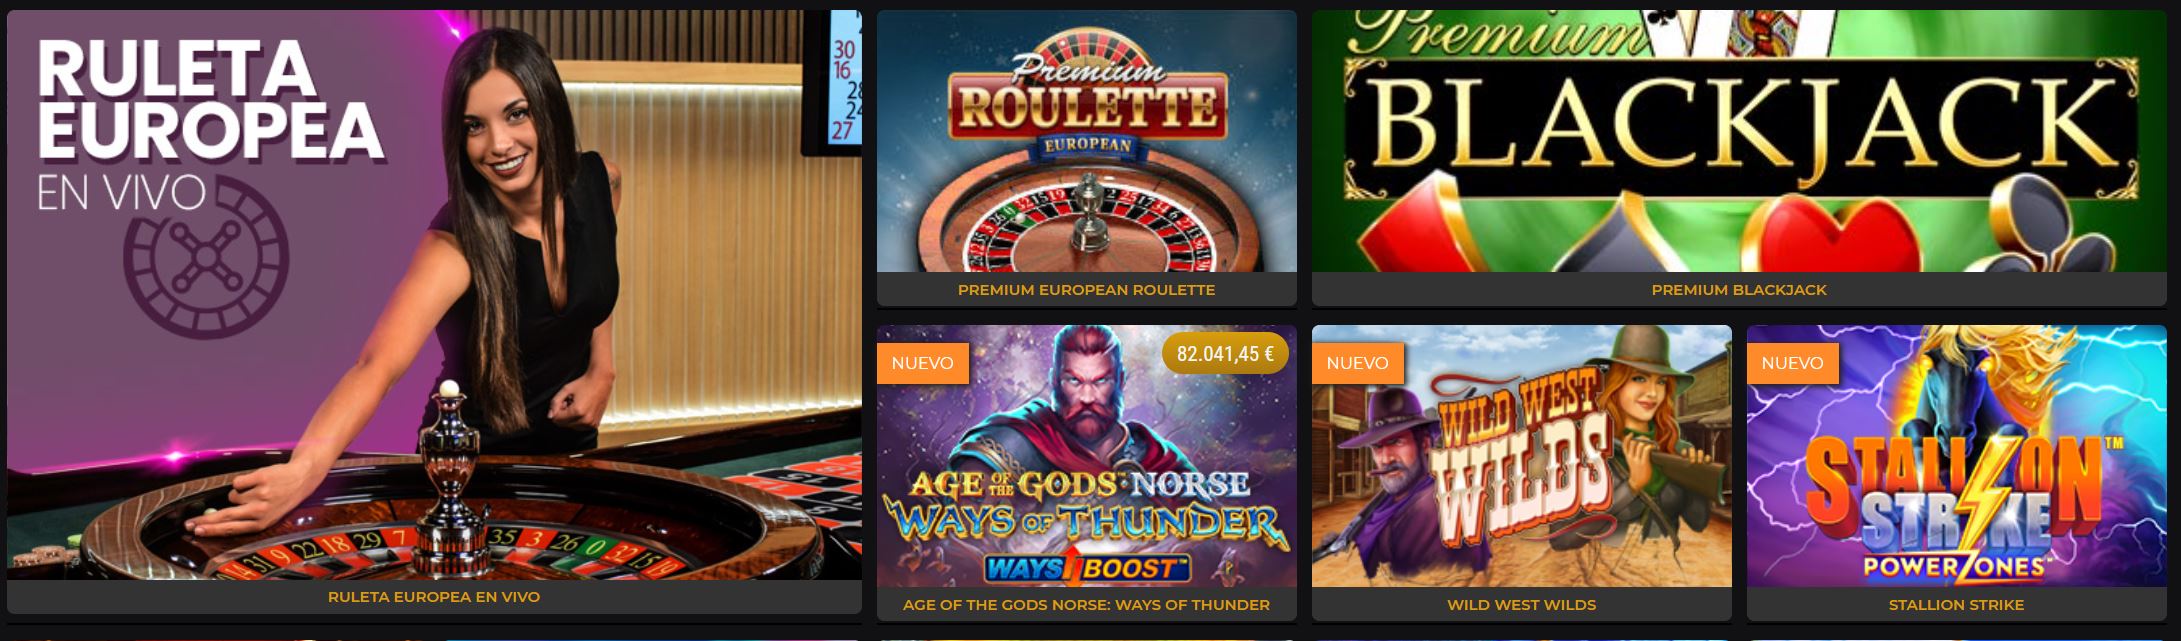 There is a wide variety of games on retabet.